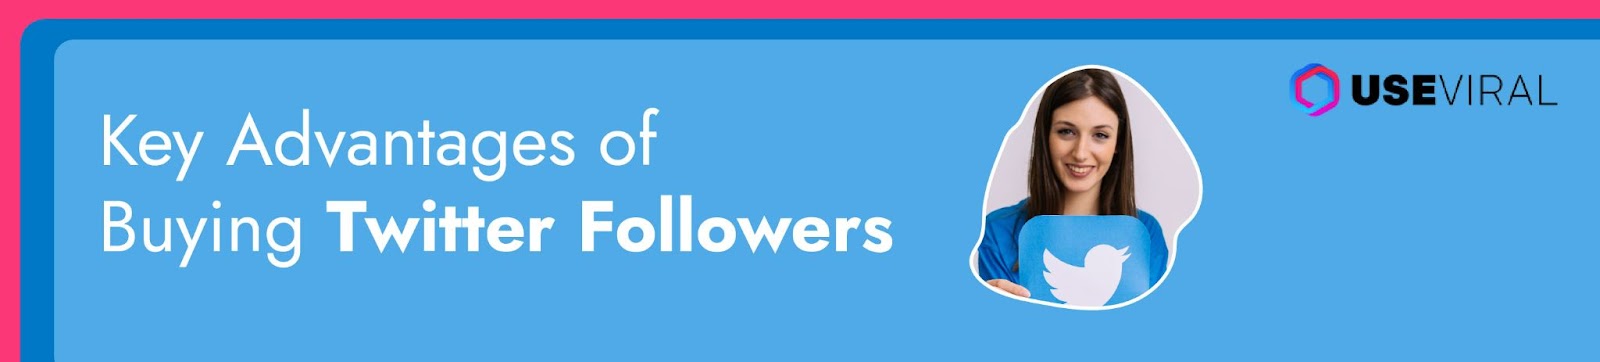 Key Advantages of Buying Twitter Followers